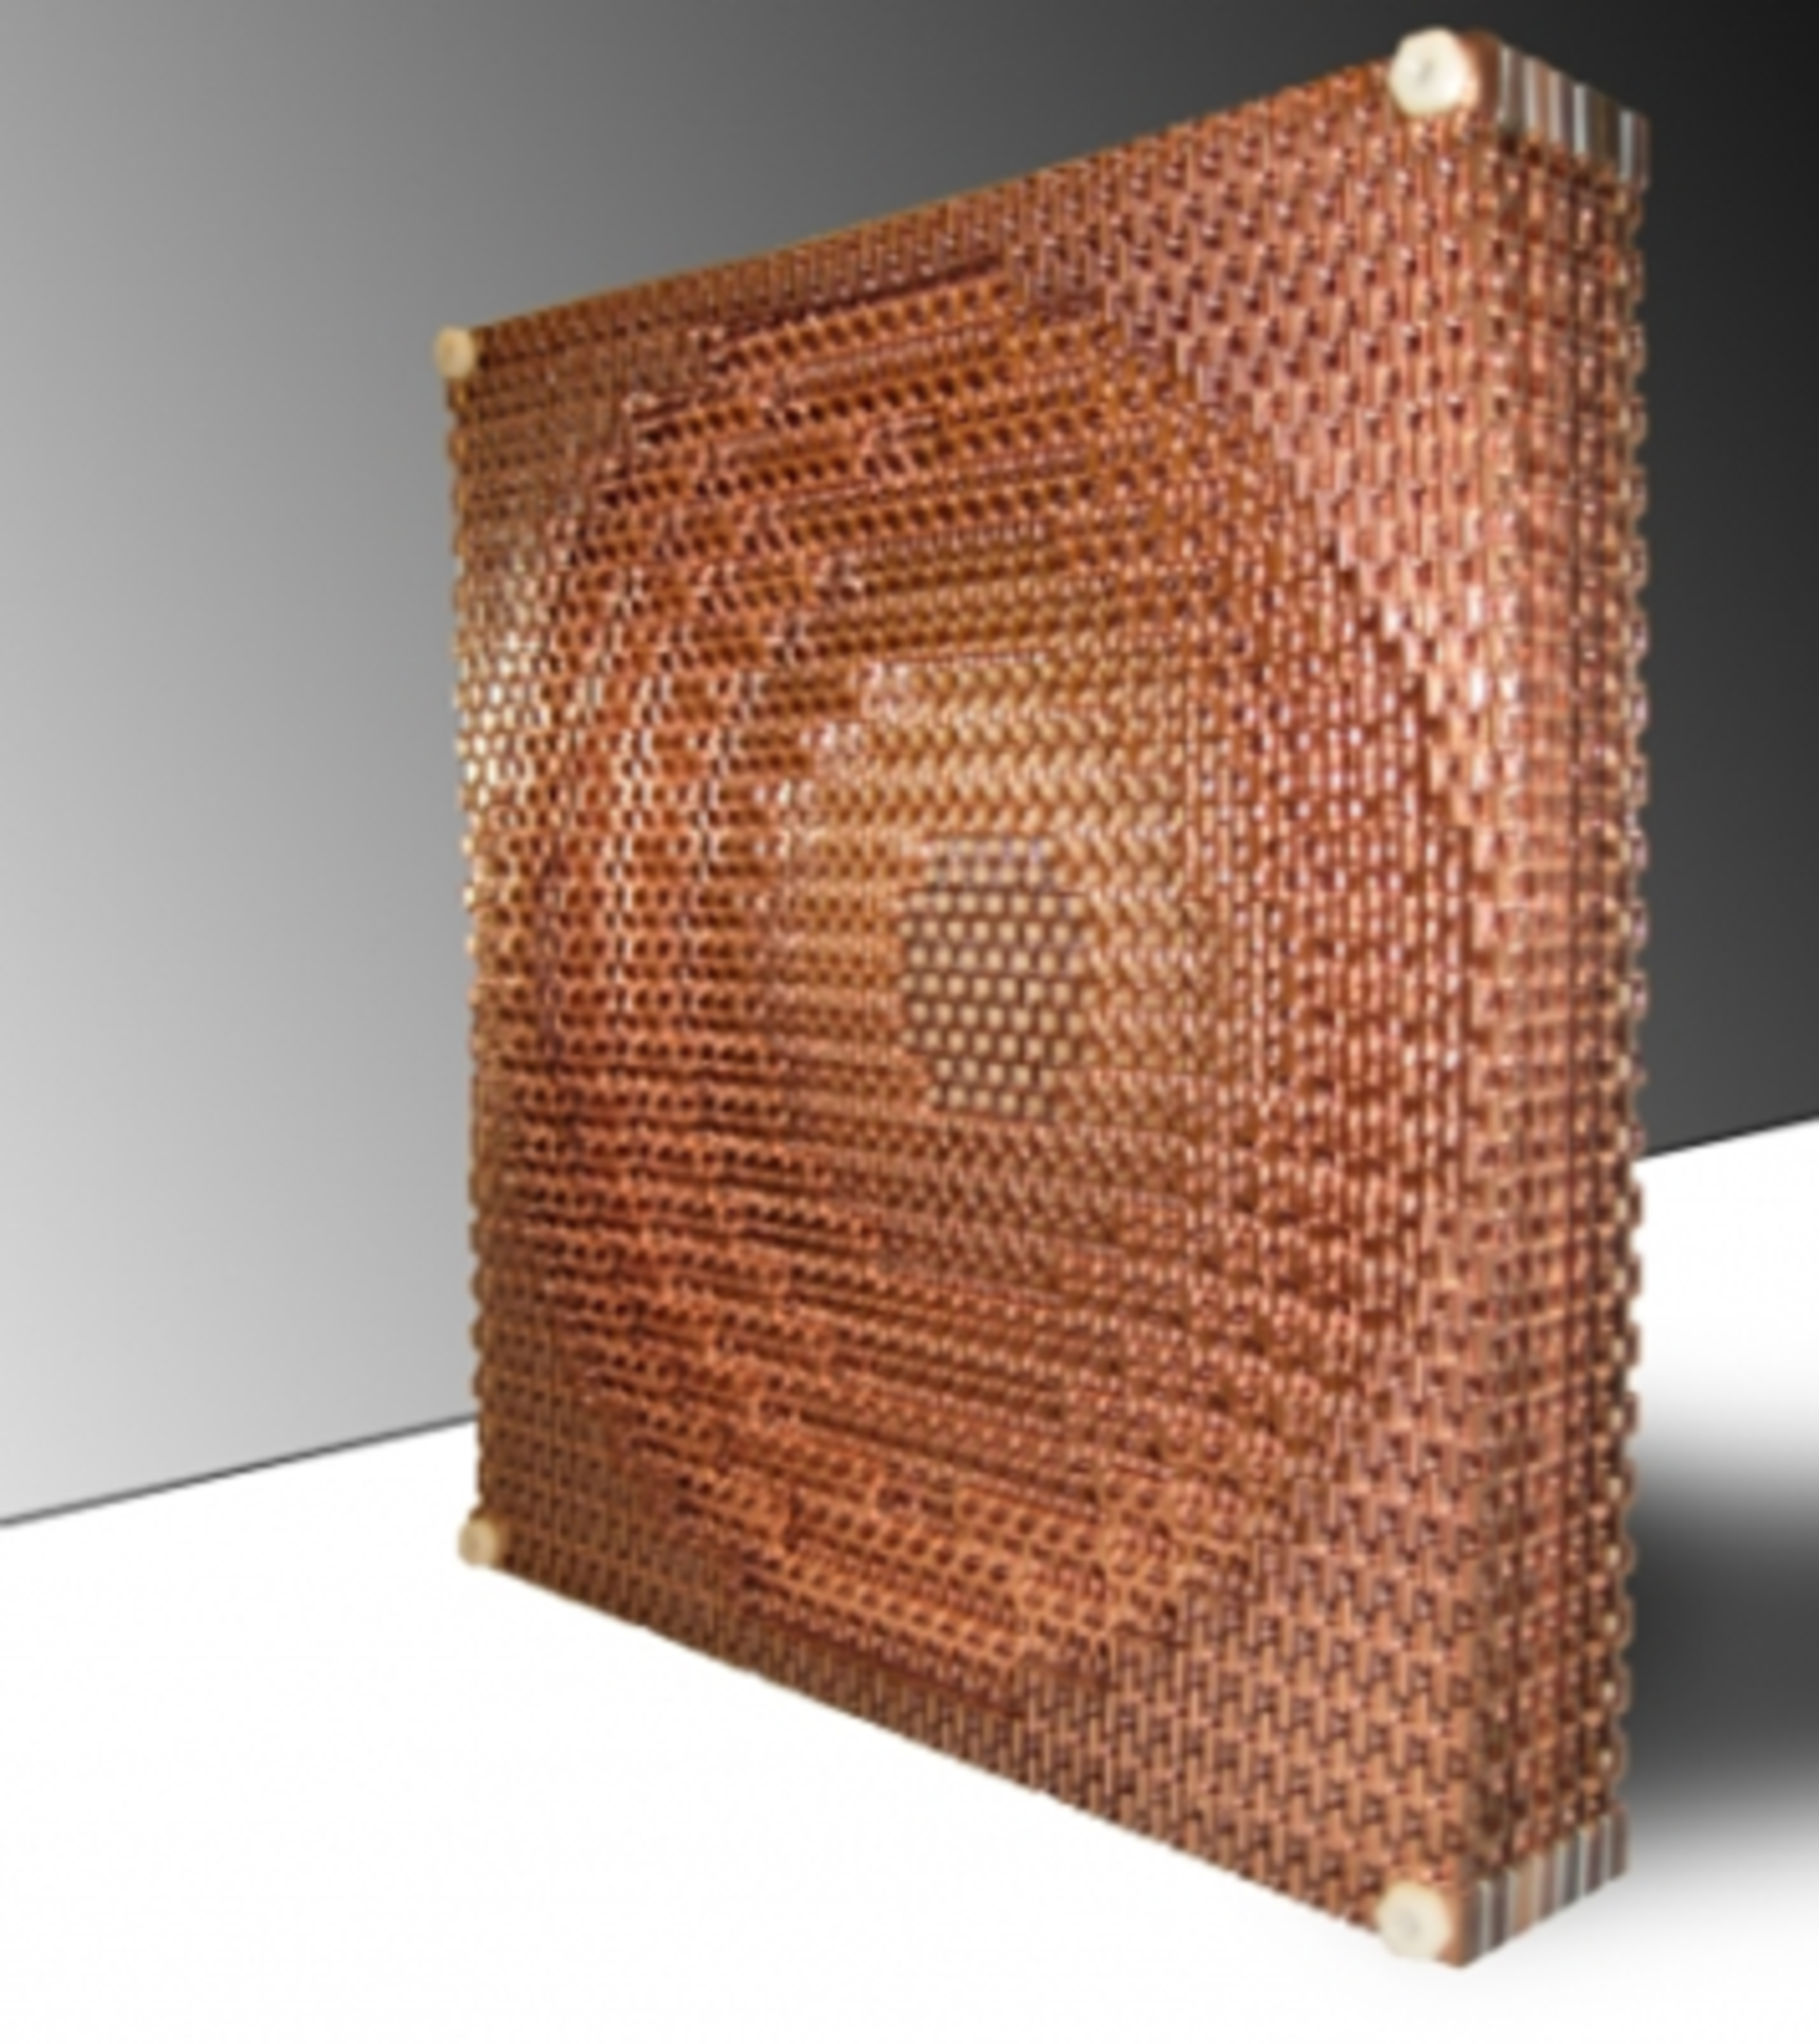 Additive Manufacturing for Frequency and polarization Selective Surfaces